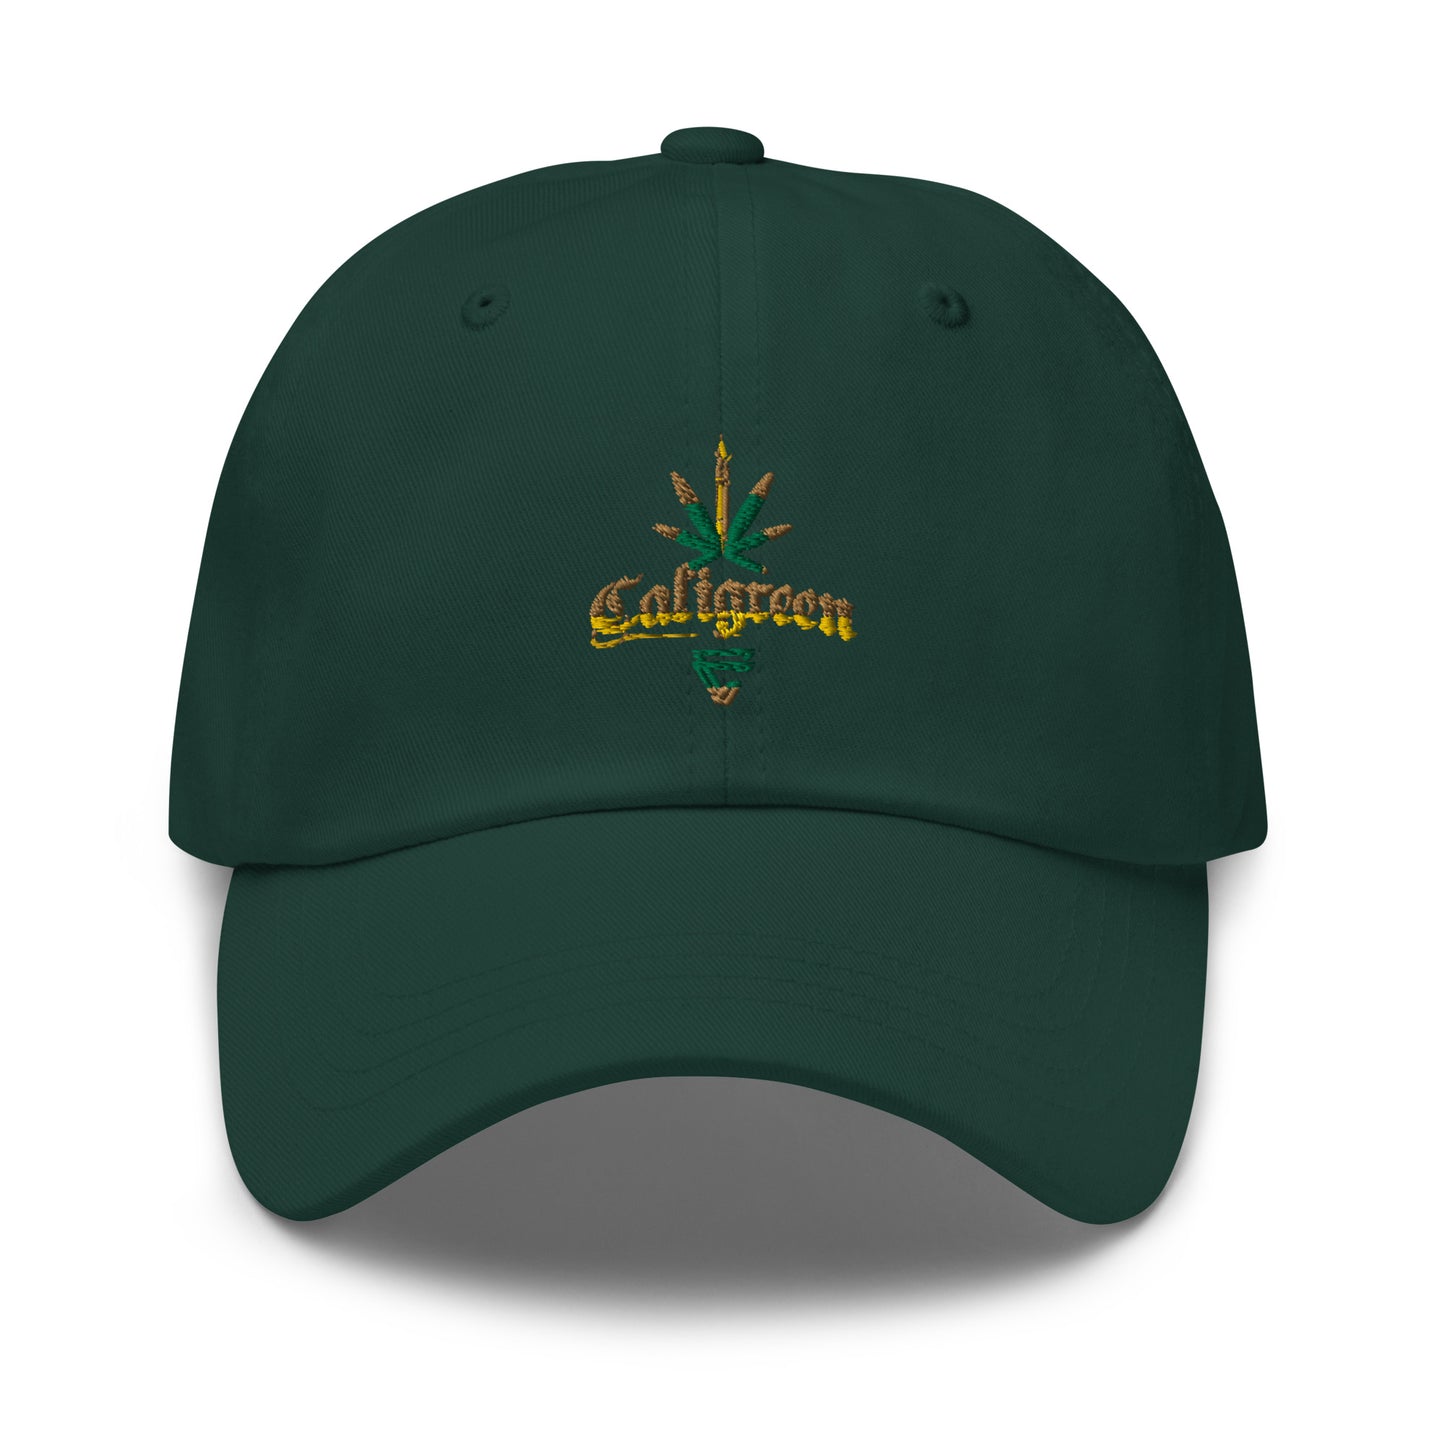 Classic Weed Dad hat